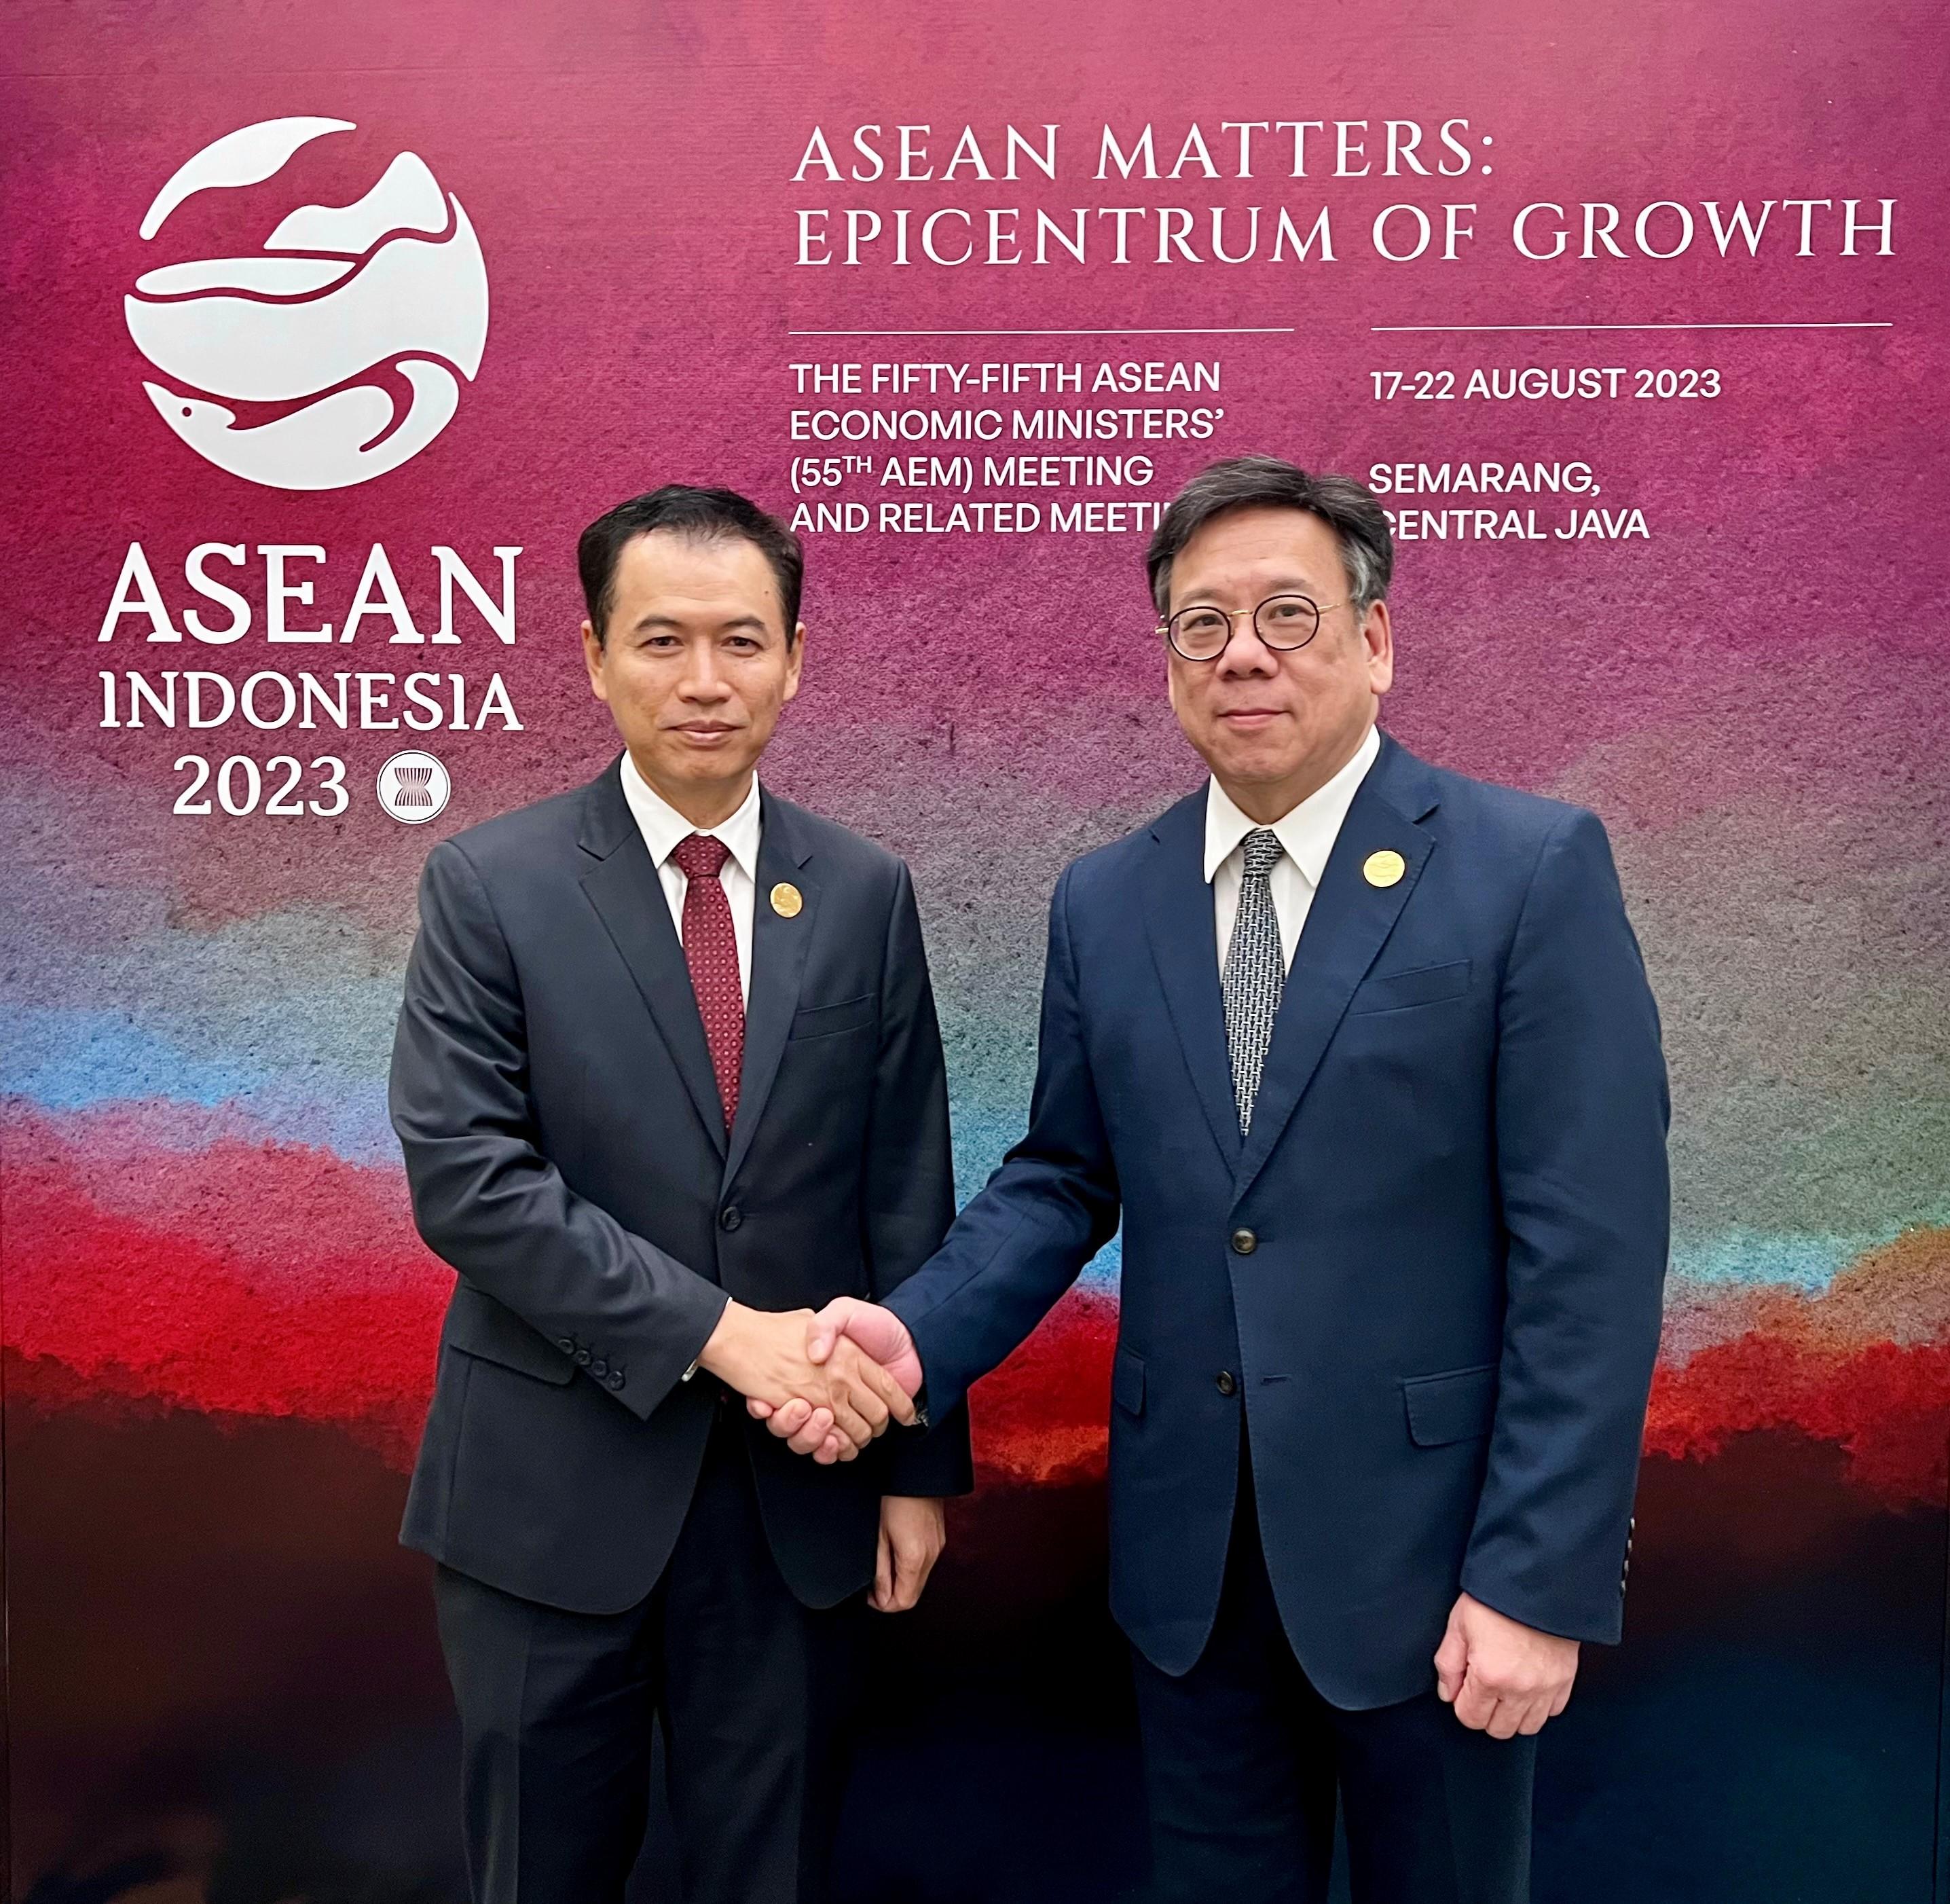 The Secretary for Commerce and Economic Development, Mr Algernon Yau (right), has a bilateral meeting with the Minister of Industry and Commerce of Laos, Mr Malaithong Kommasith (left), in Semarang, Indonesia, today (August 20) to discuss various trade and economic issues.